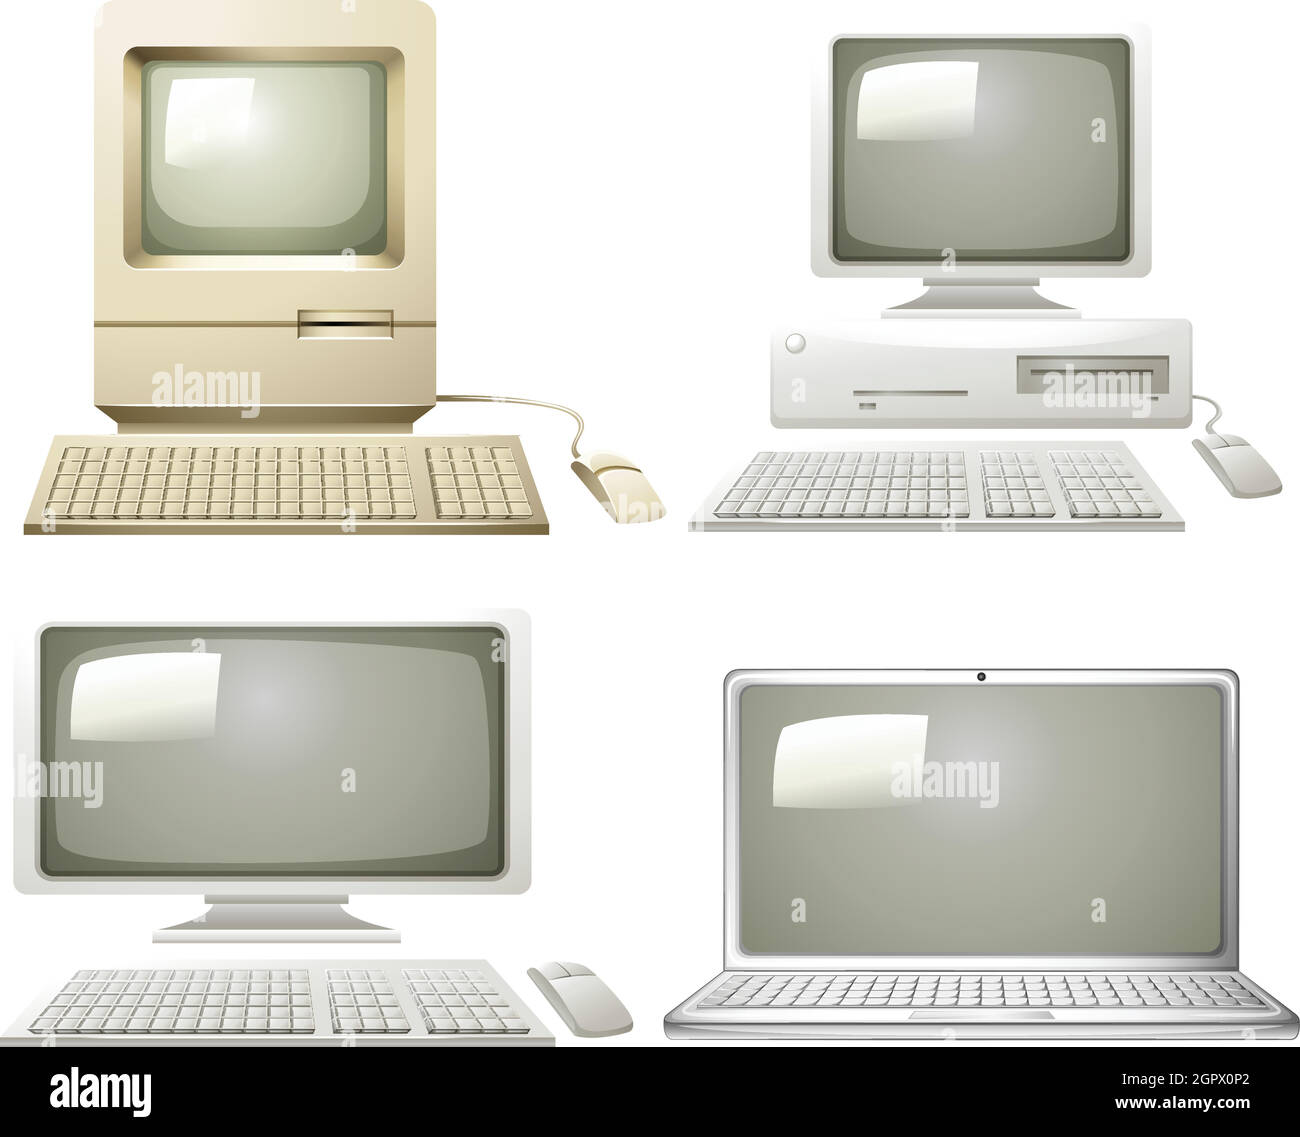 Different generation of personal computer Stock Vector